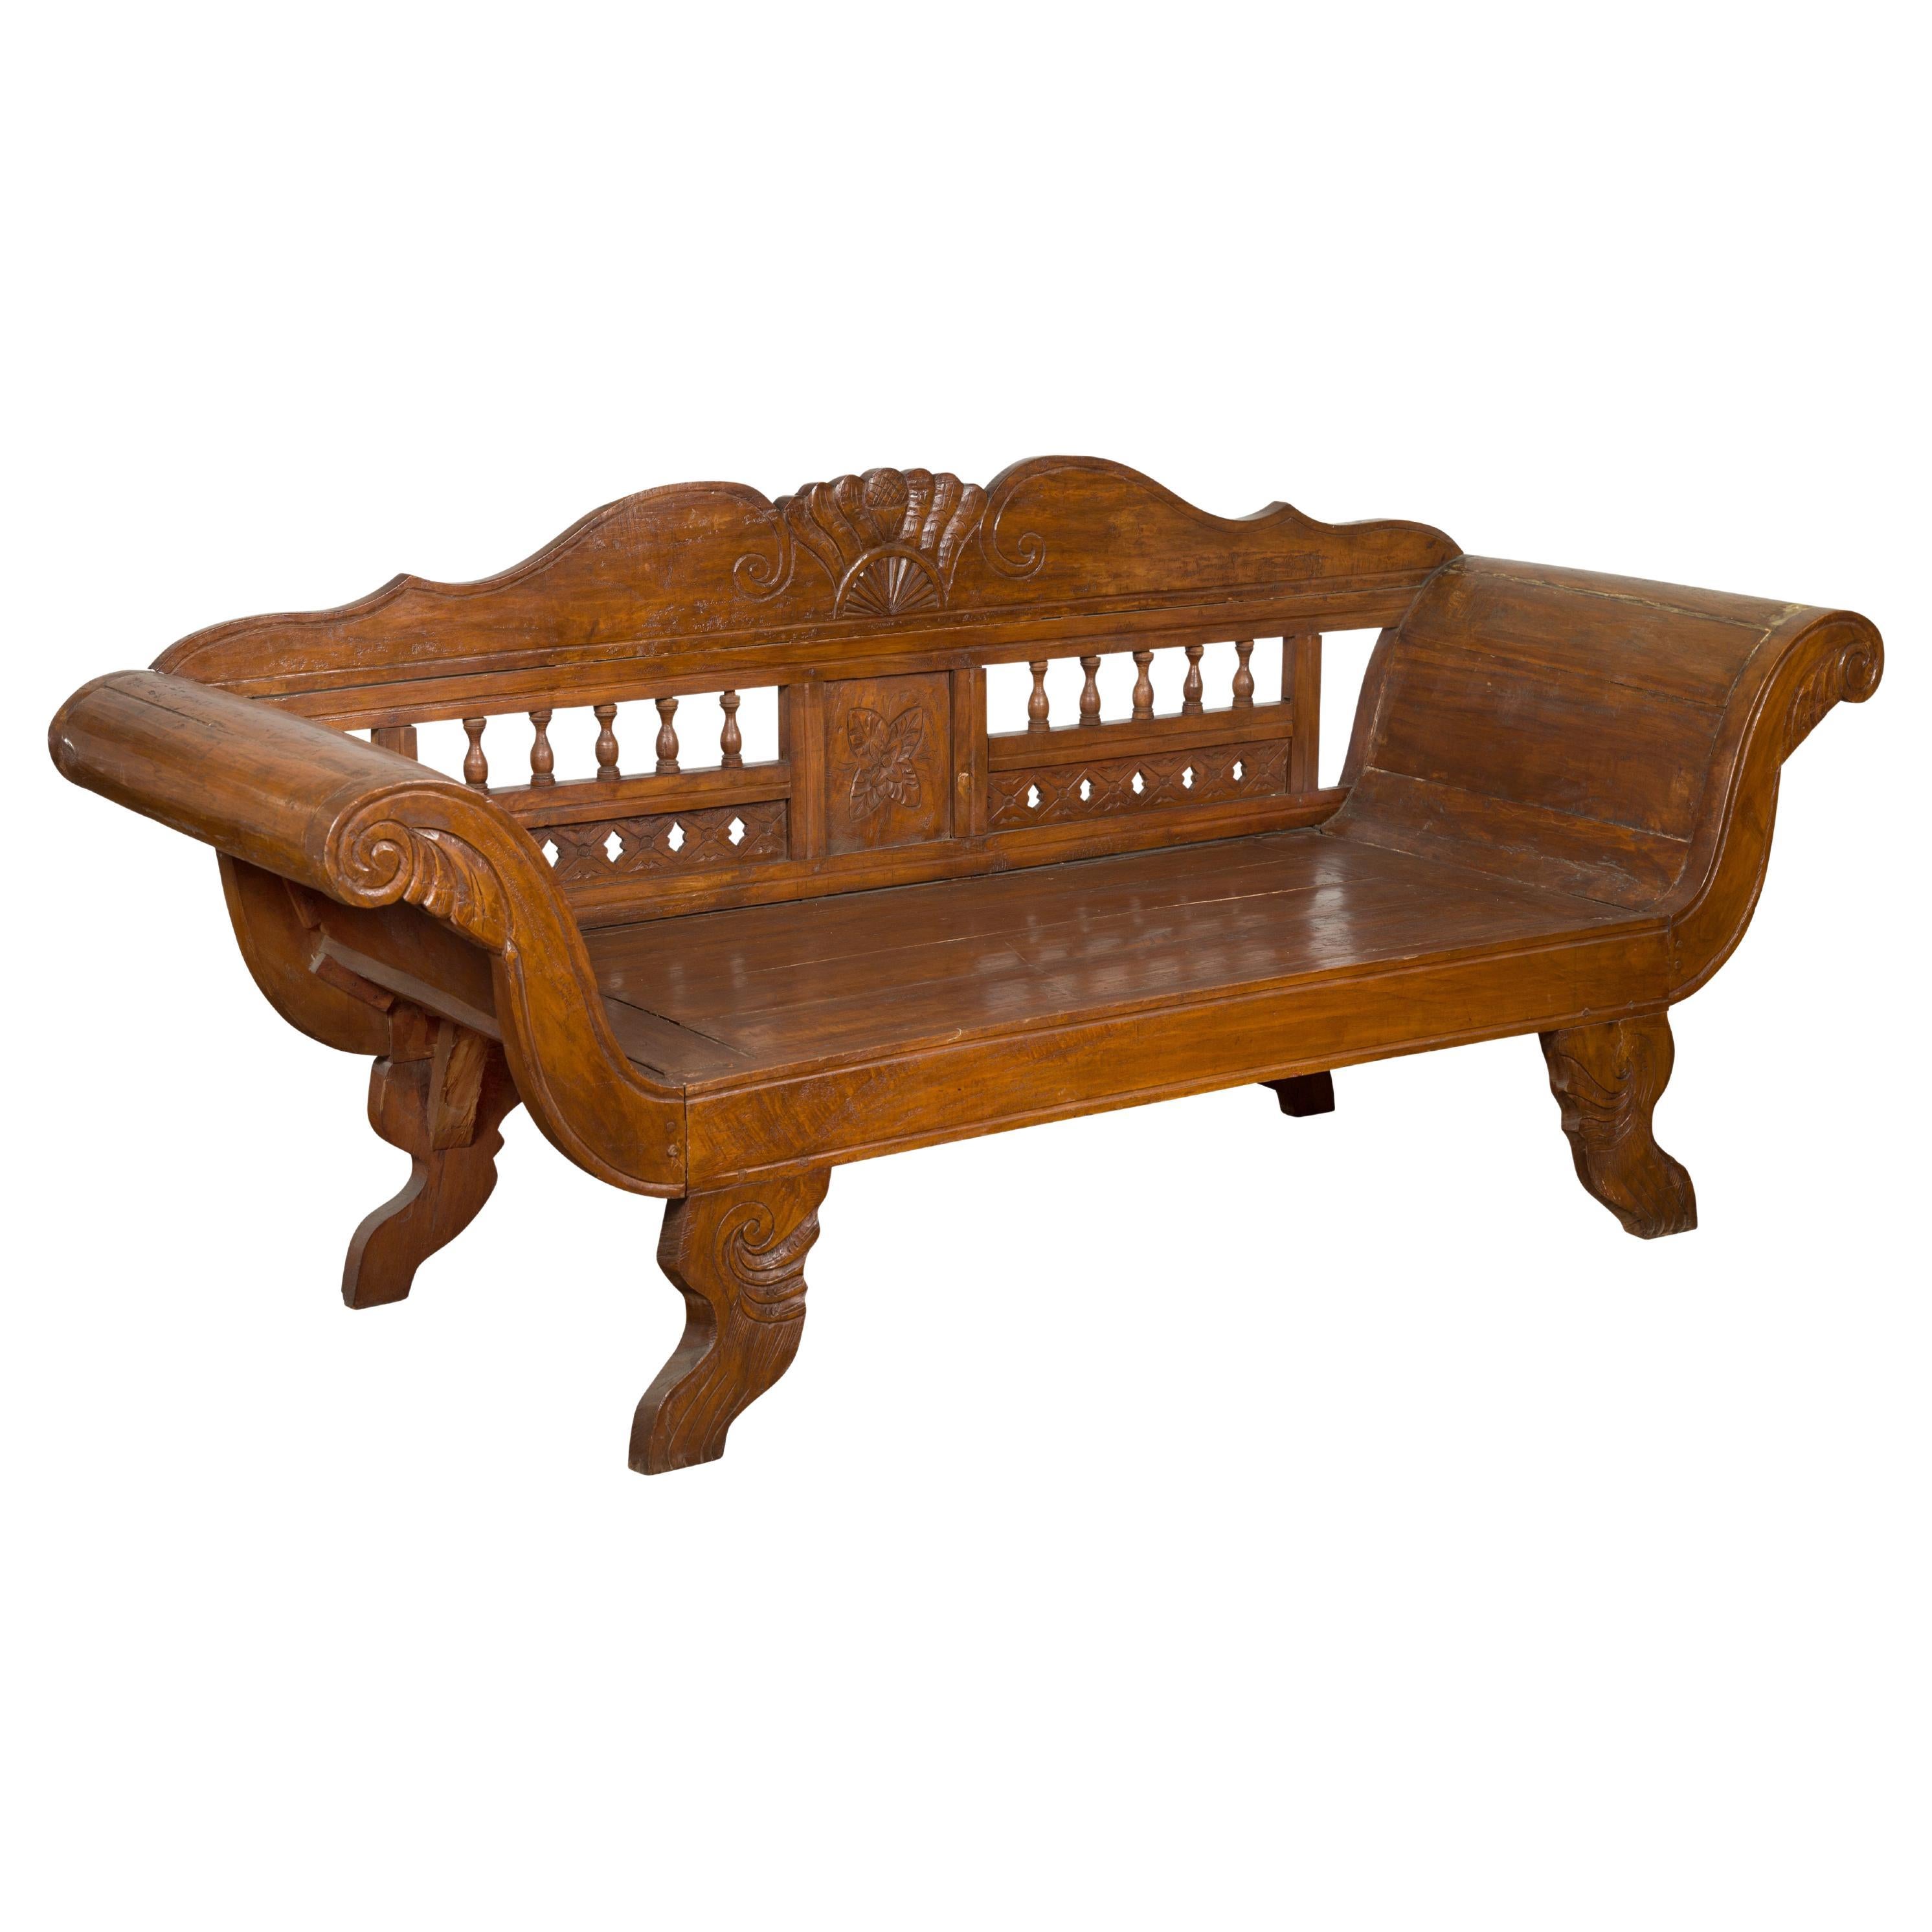 Javanese Teak Settee with Carved Décor and Out-Scrolling Arms